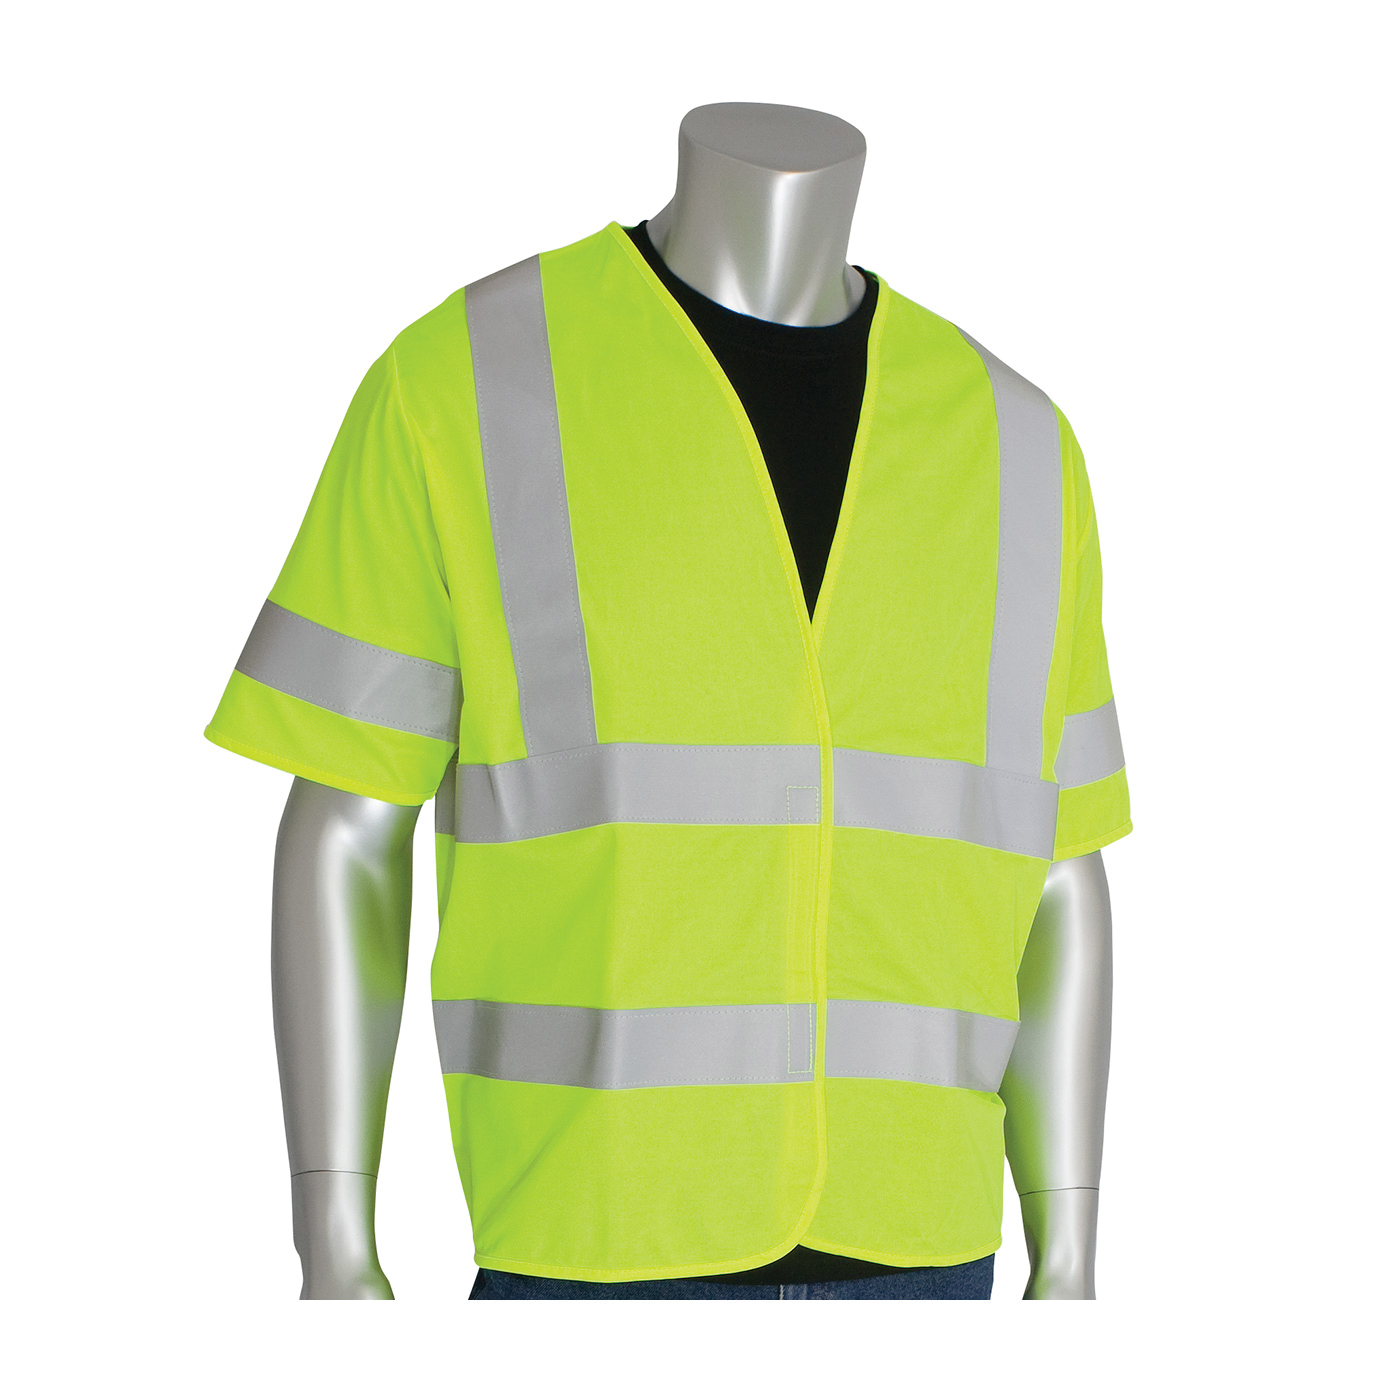 PIP® SafetyGear 305-HSSVFRLY-L/XL FR Treated Standard Solid Vest, L to XL, Hi-Viz Yellow, Polyester, Hook and Loop Closure, ANSI Class: Class 3, ANSI/ISEA 107